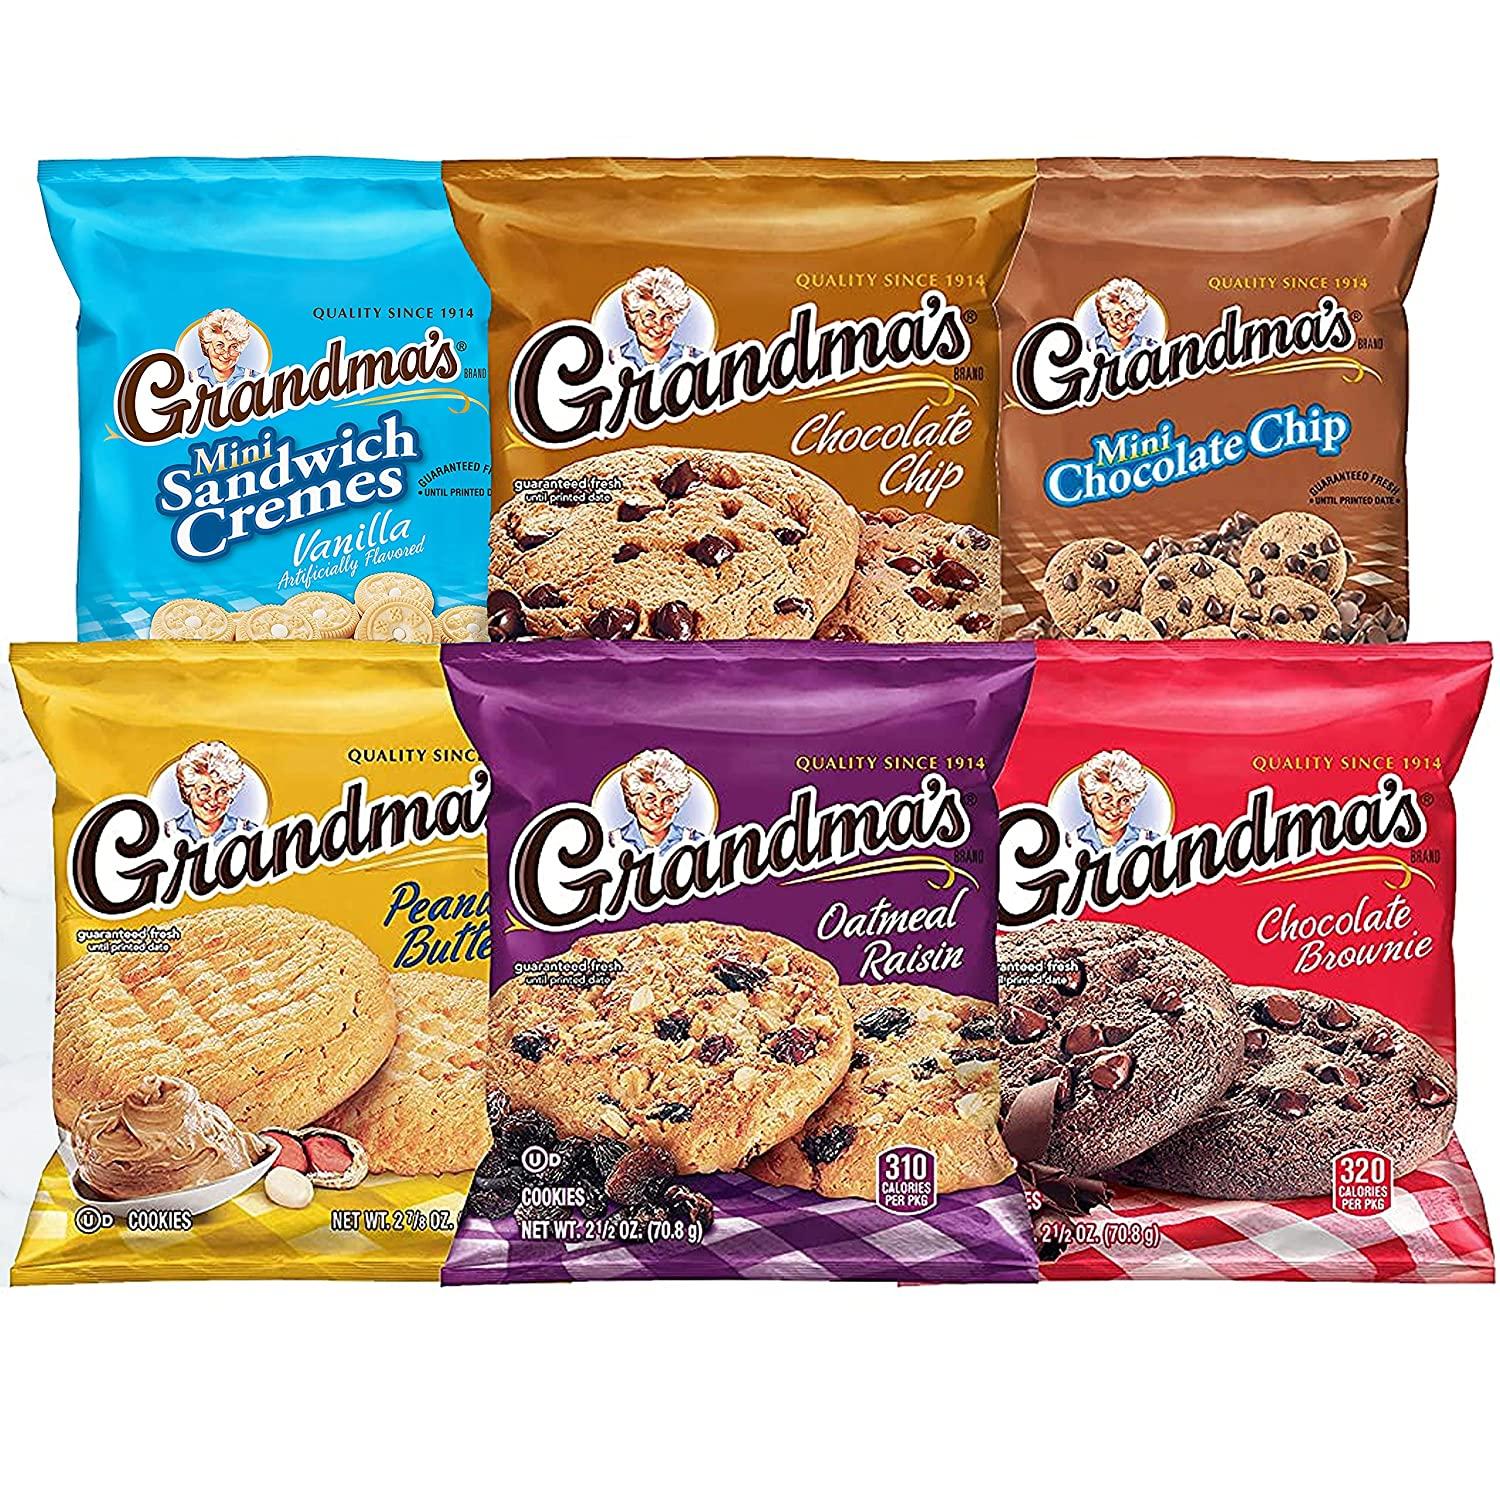 30 Grandmas Cookies Variety Pack for $11.38 Shipped